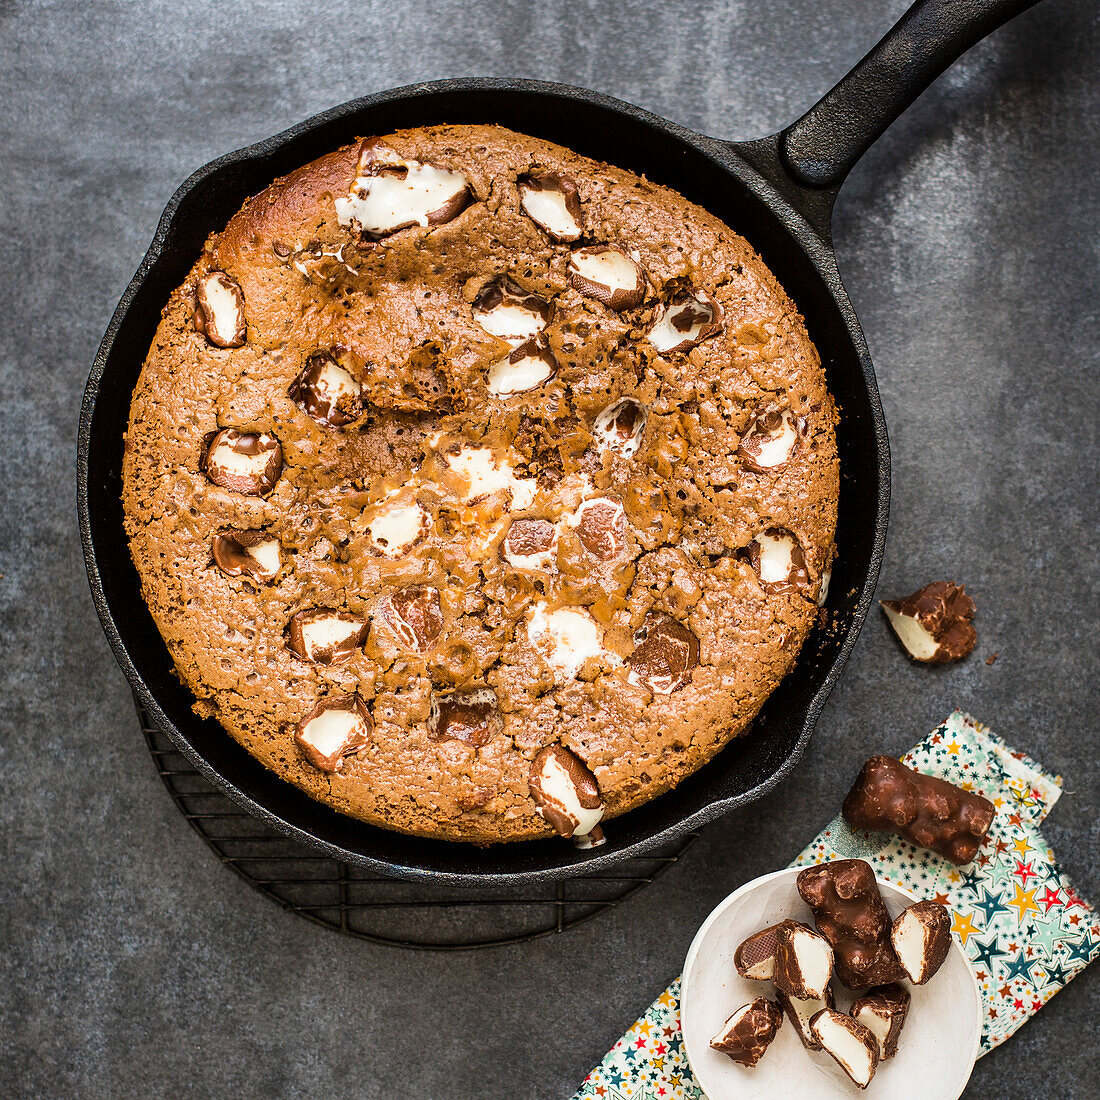 Cast iron skillet chocolate cake with marshmallows